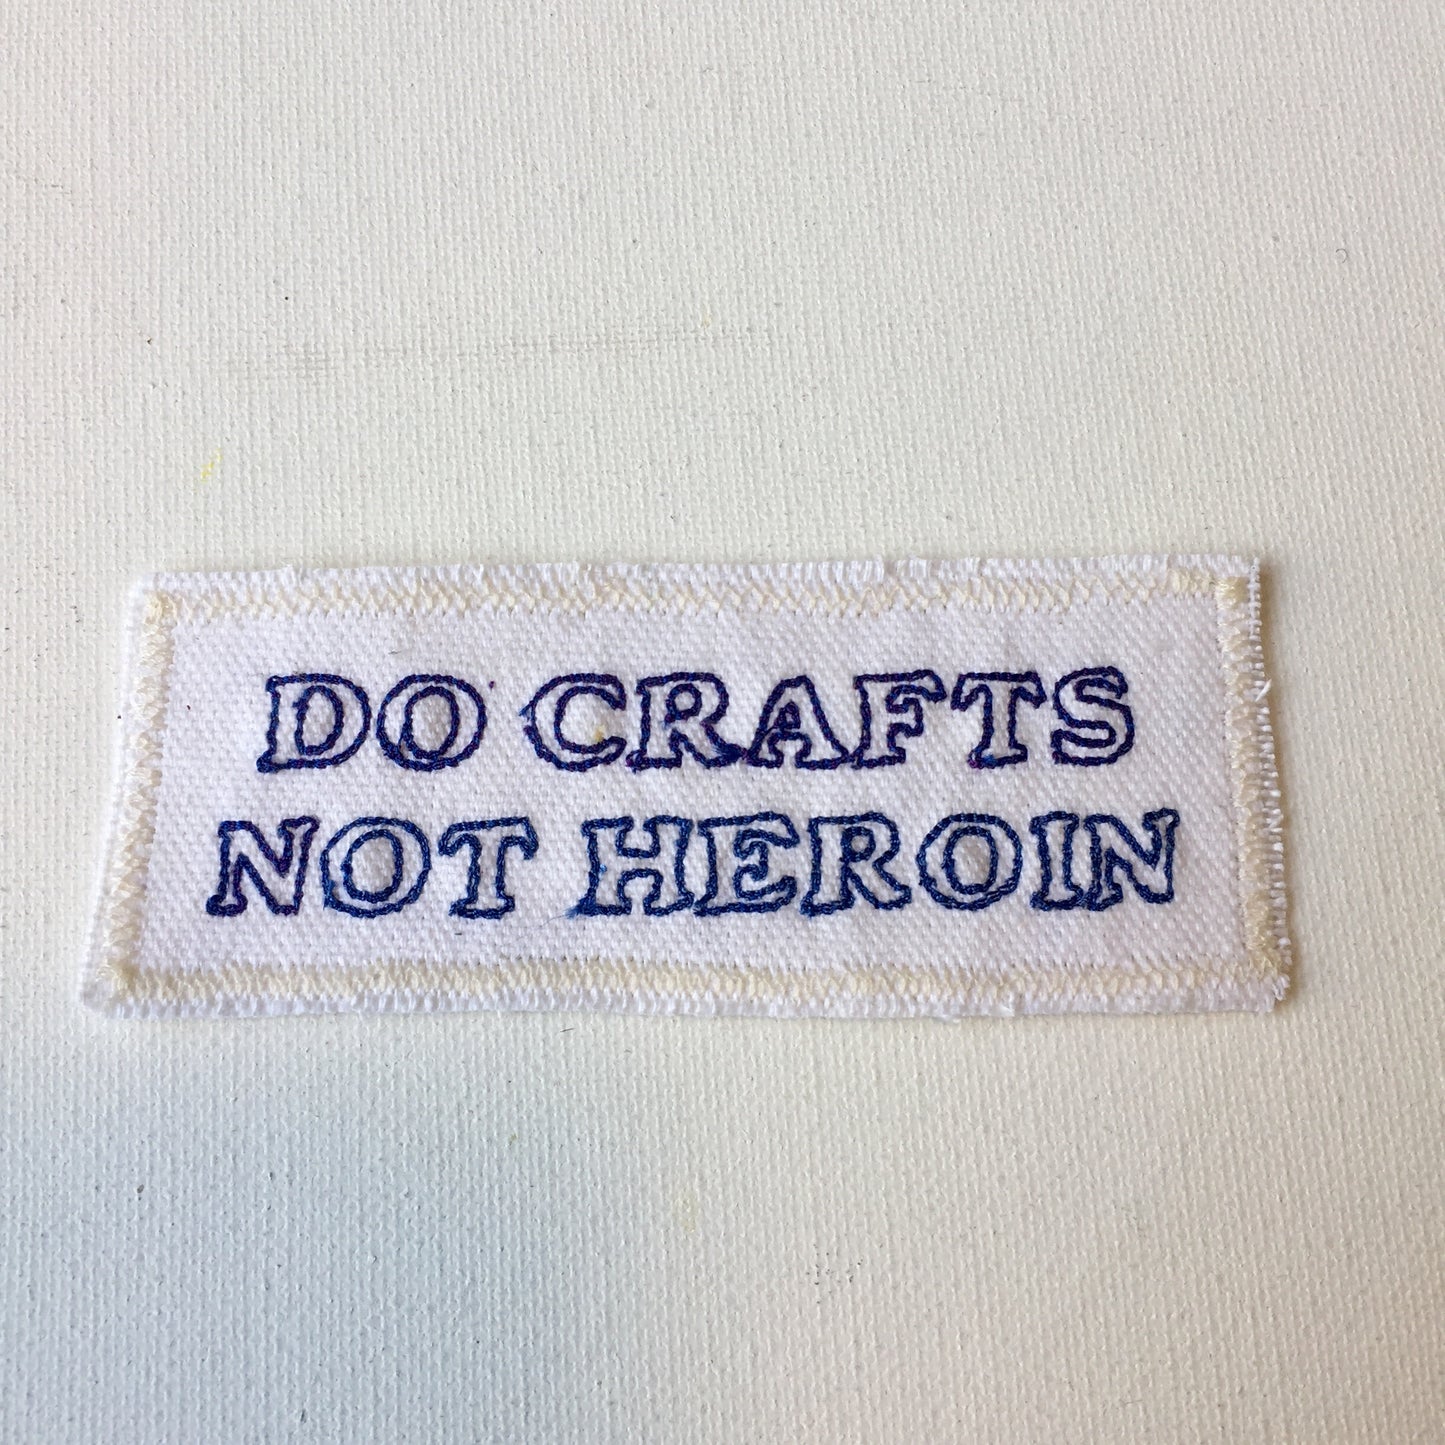 Do Crafts, Not Heroin. Handmade Embroidered Canvas Patch.